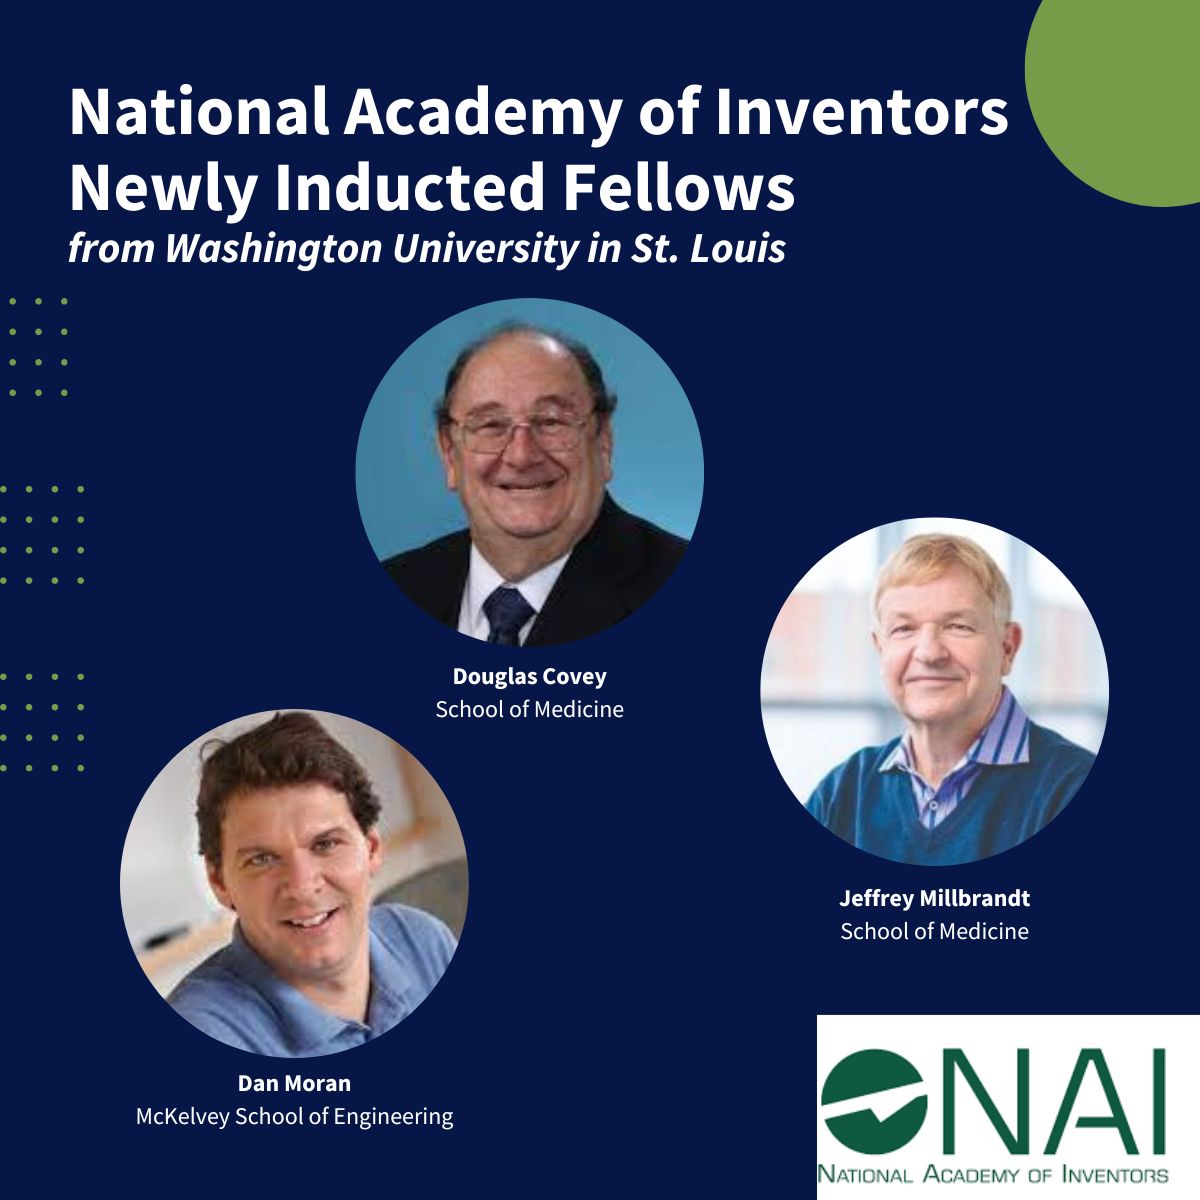 Congratulations to three professors from Washington University in St. Louis inducted as National Academy of Inventors Fellows!

NAI Fellow status is the highest professional distinction accorded solely to academic inventors.

#NAI2022 #DefineTomorrow #STLMade